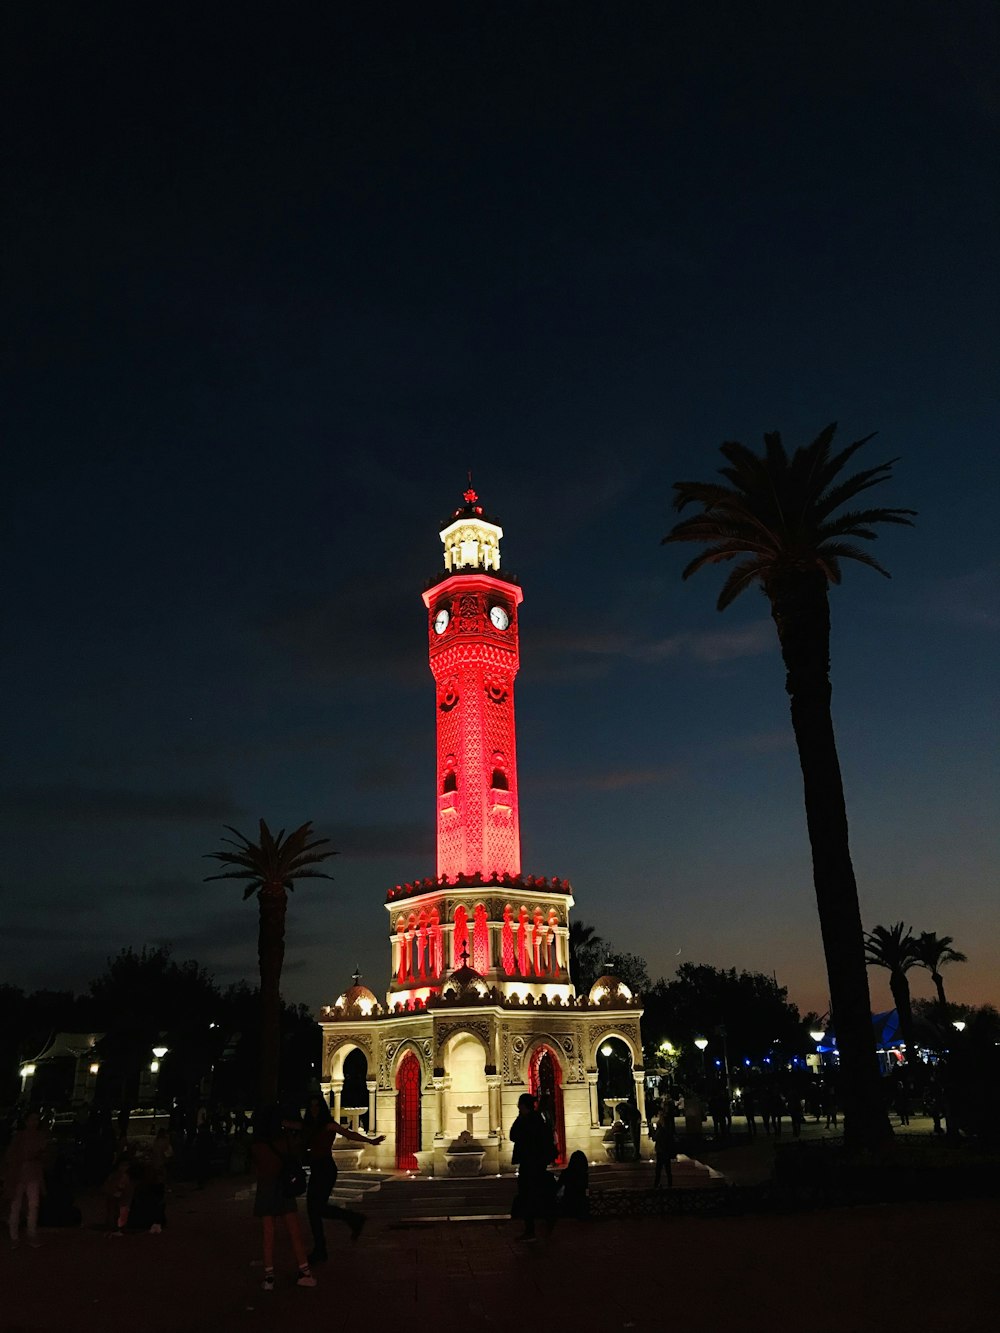 a red and white clock tower lit up at night